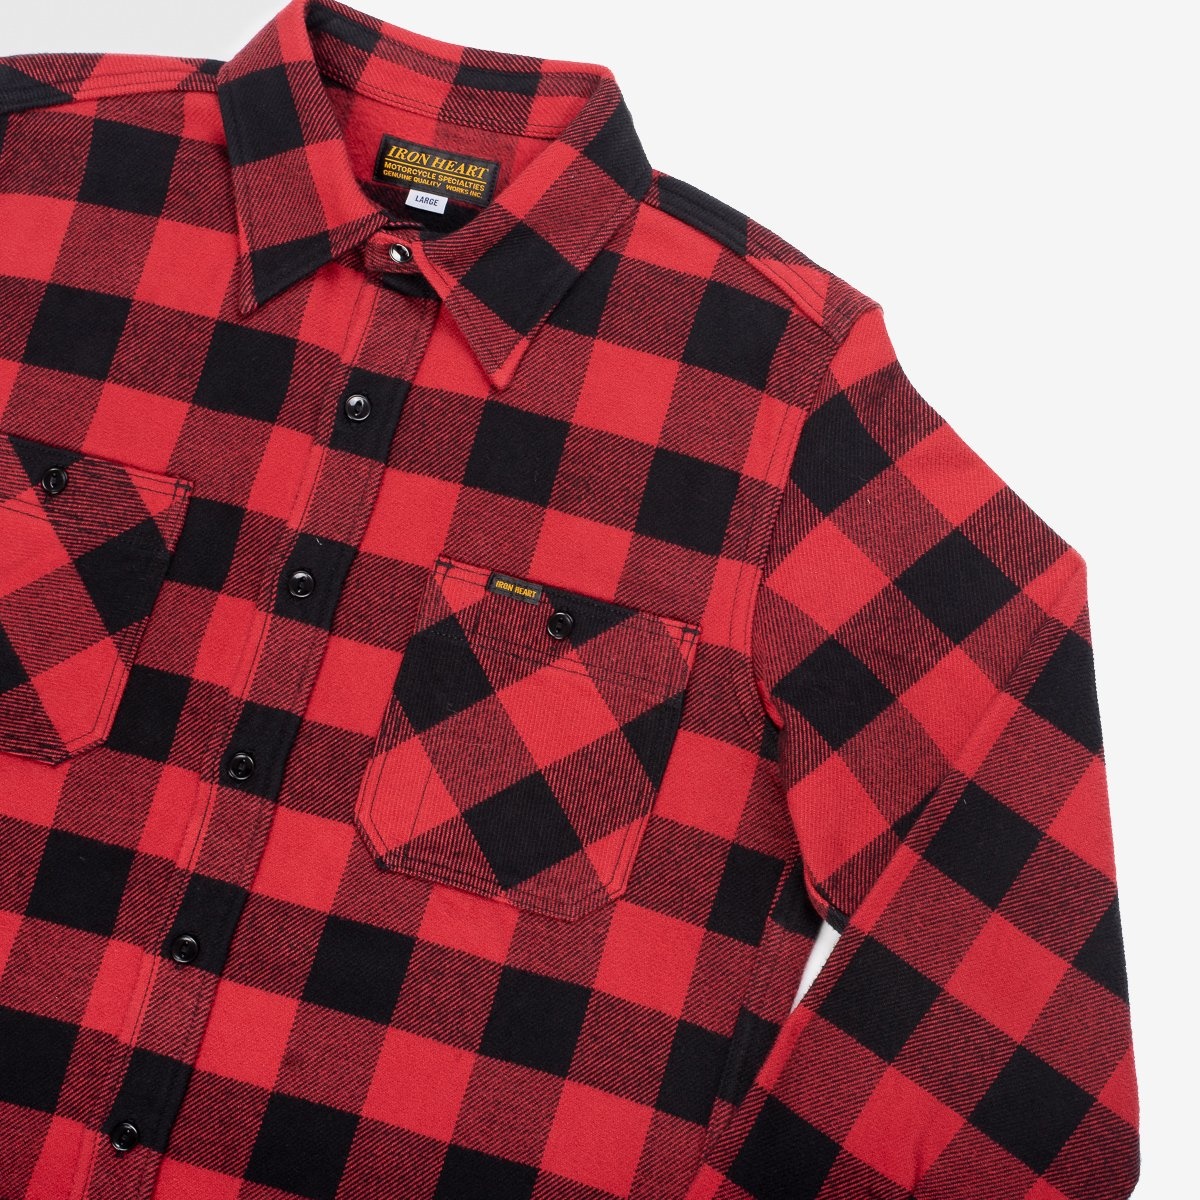 IHSH-244-RED Ultra Heavy Flannel Buffalo Check Work Shirt - Red/Black - 5